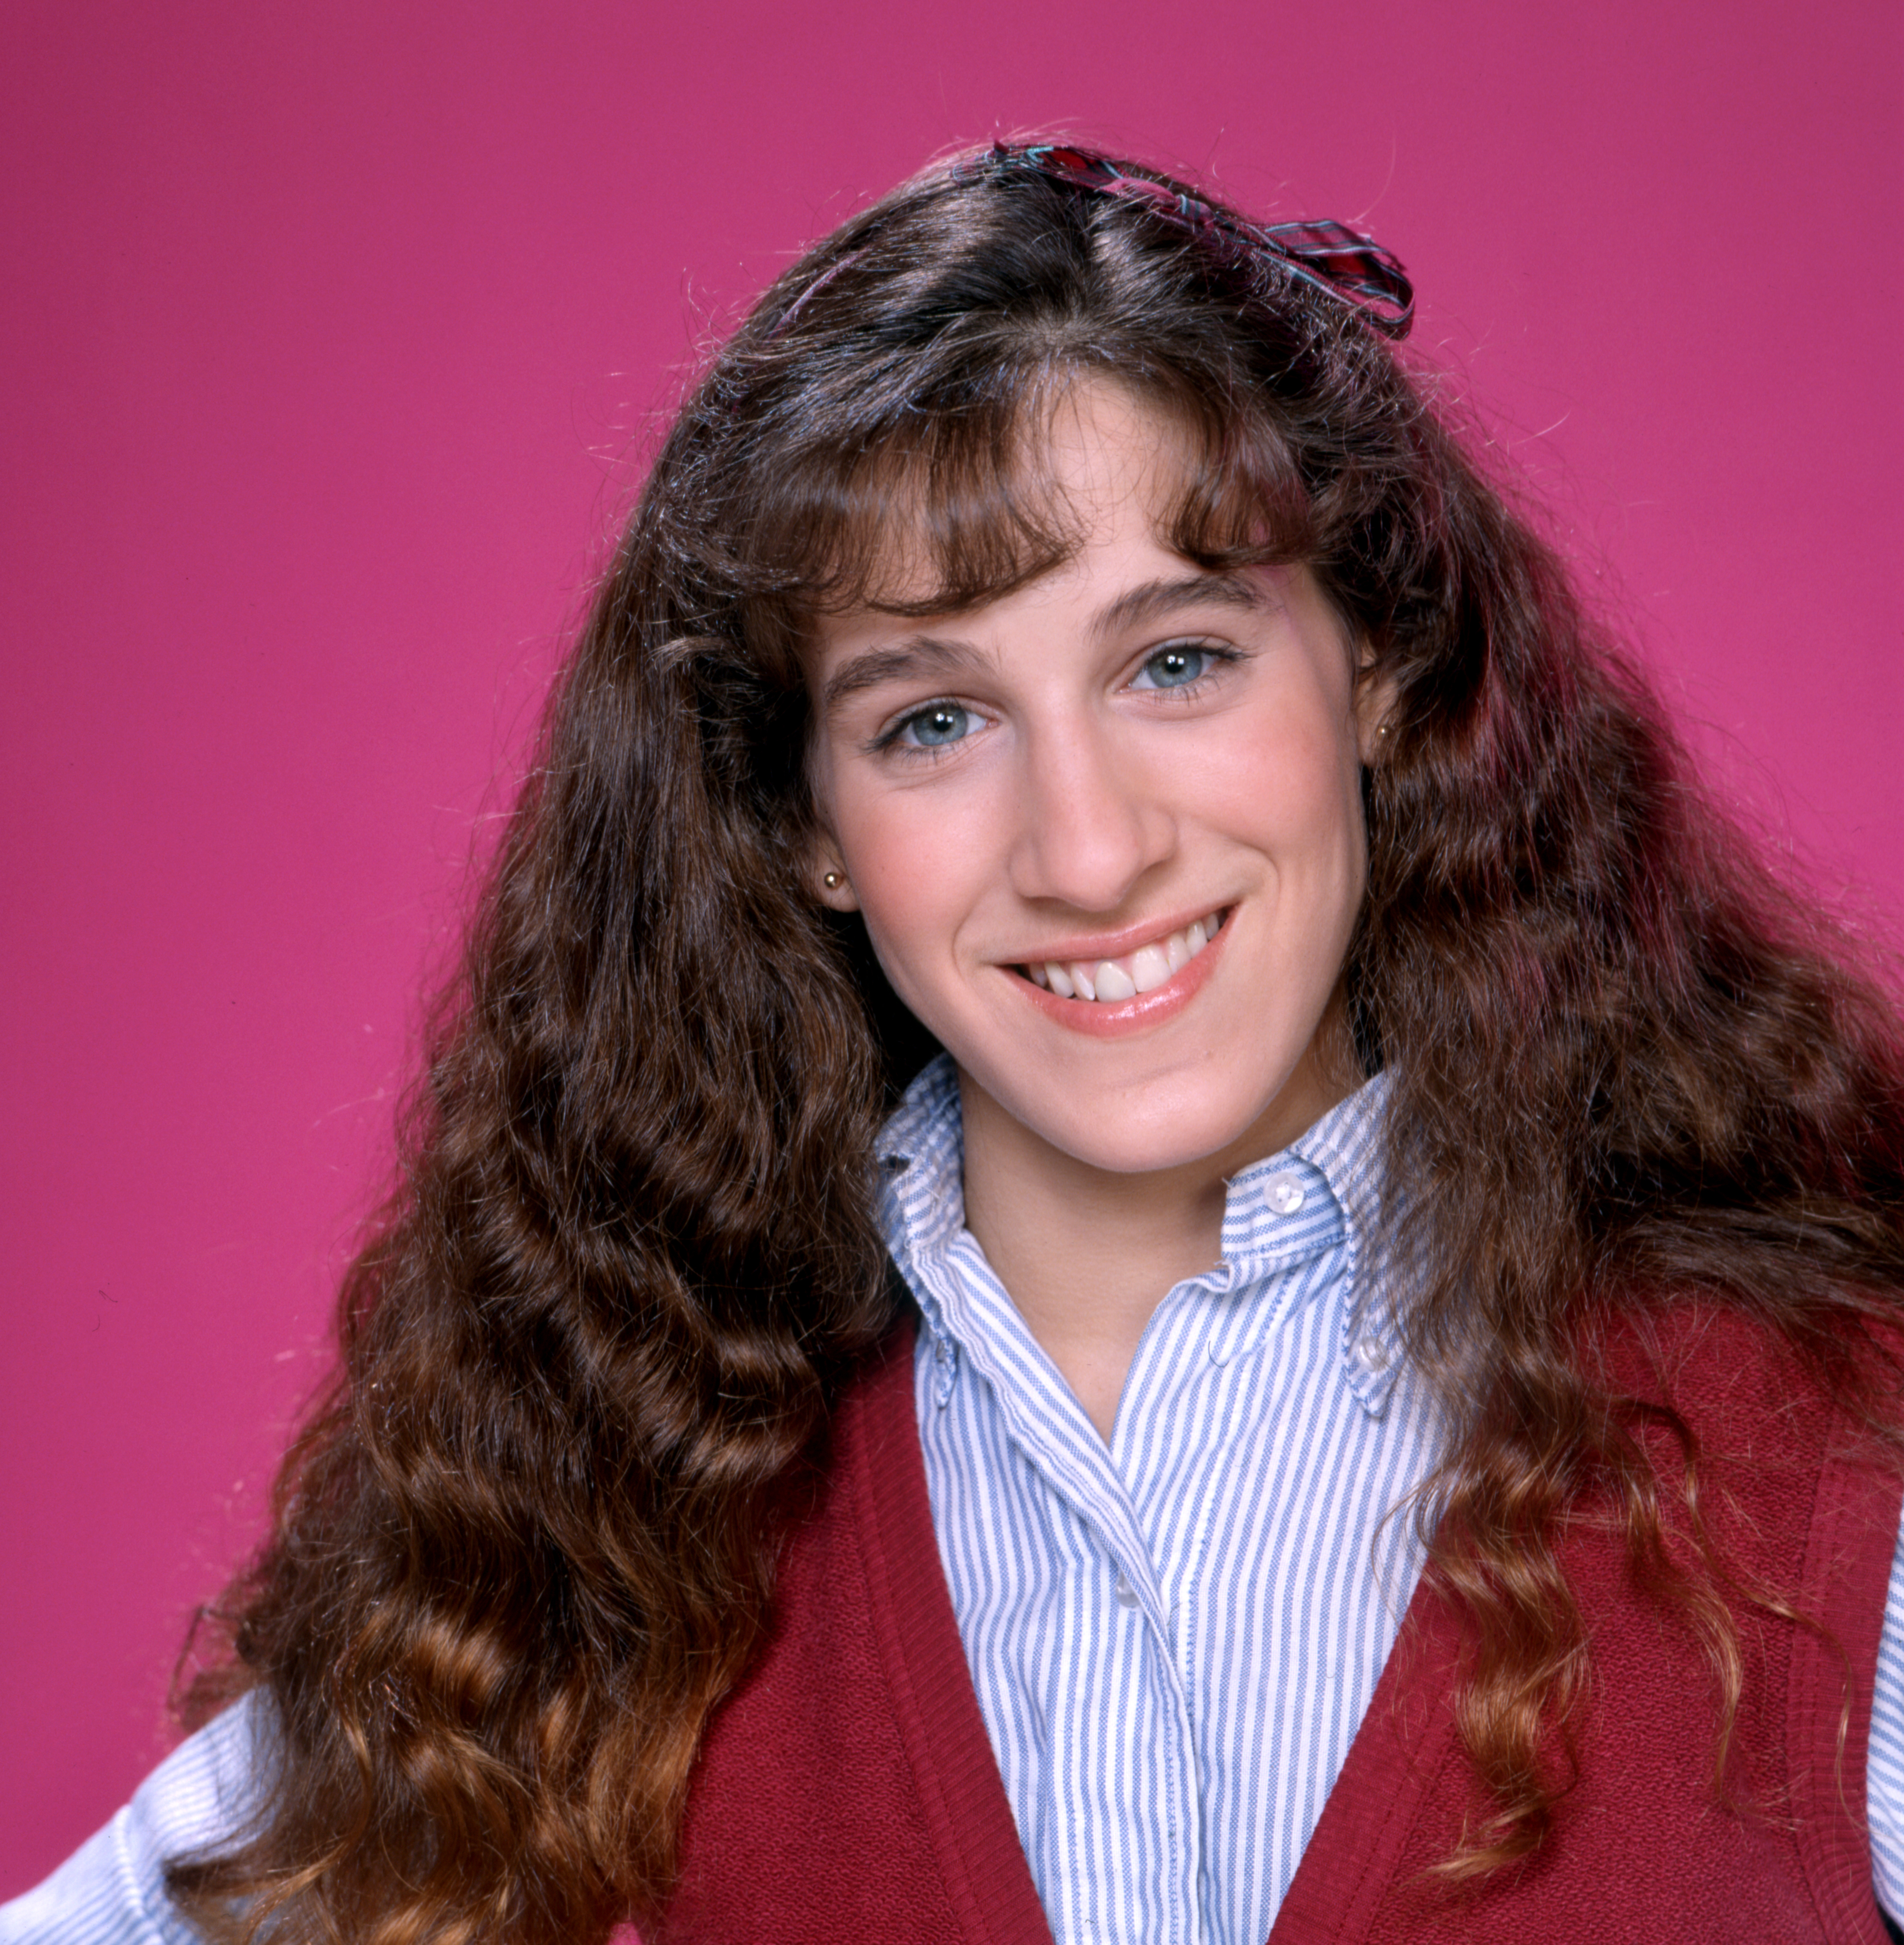 Sarah Jessica Parker on the set of "Square Pegs," 1982 | Source: Getty Images